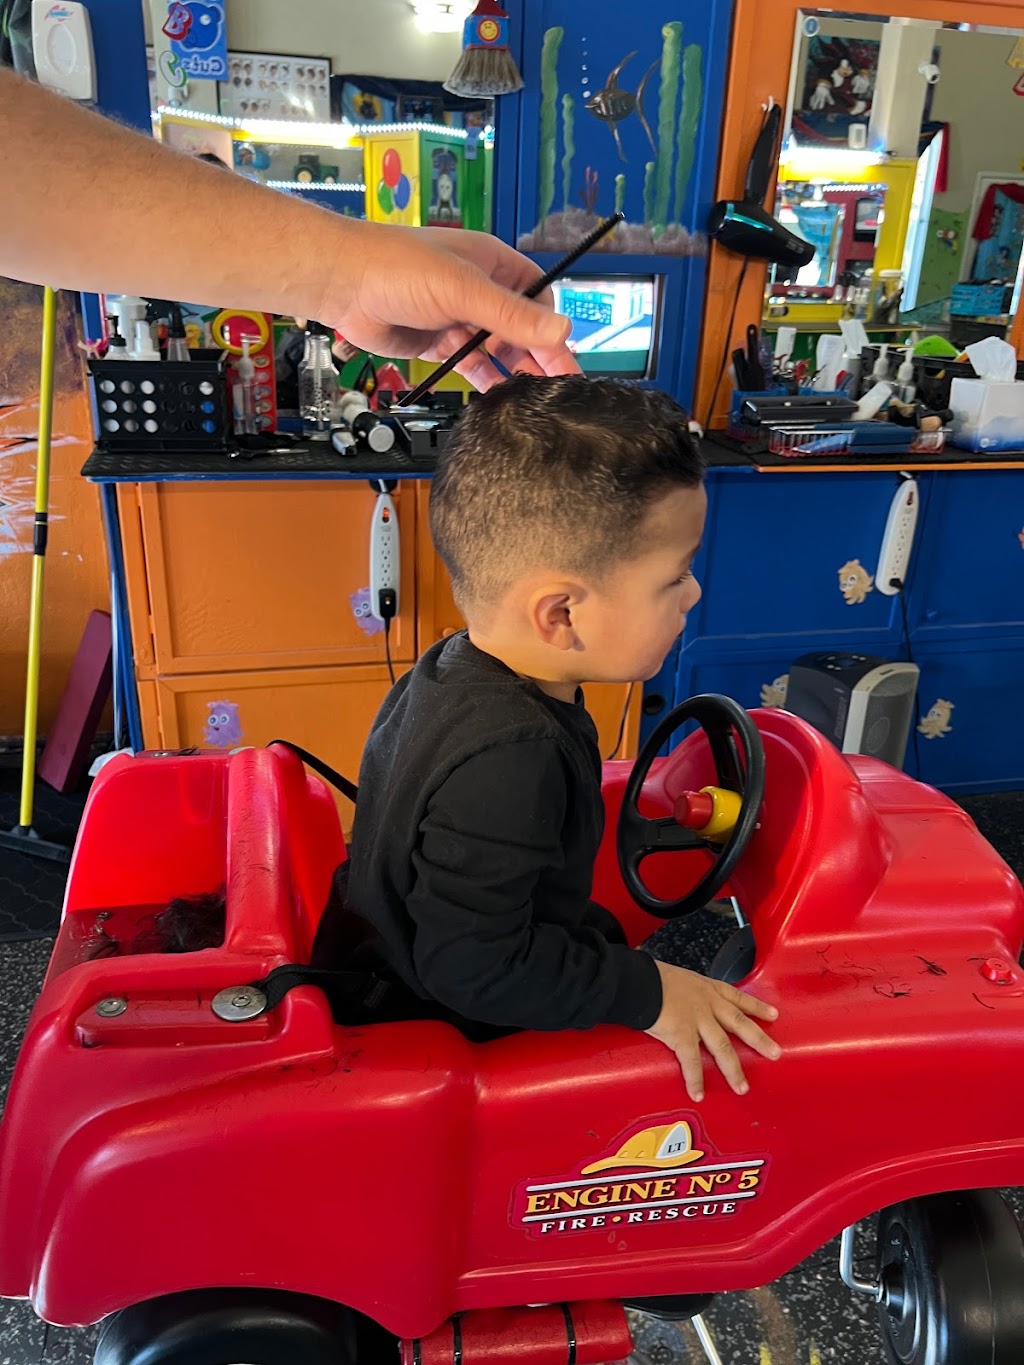 Cubby Cuts Haircuts For Kids | 1734 El Camino Real, Mountain View, CA 94040 | Phone: (650) 964-5437